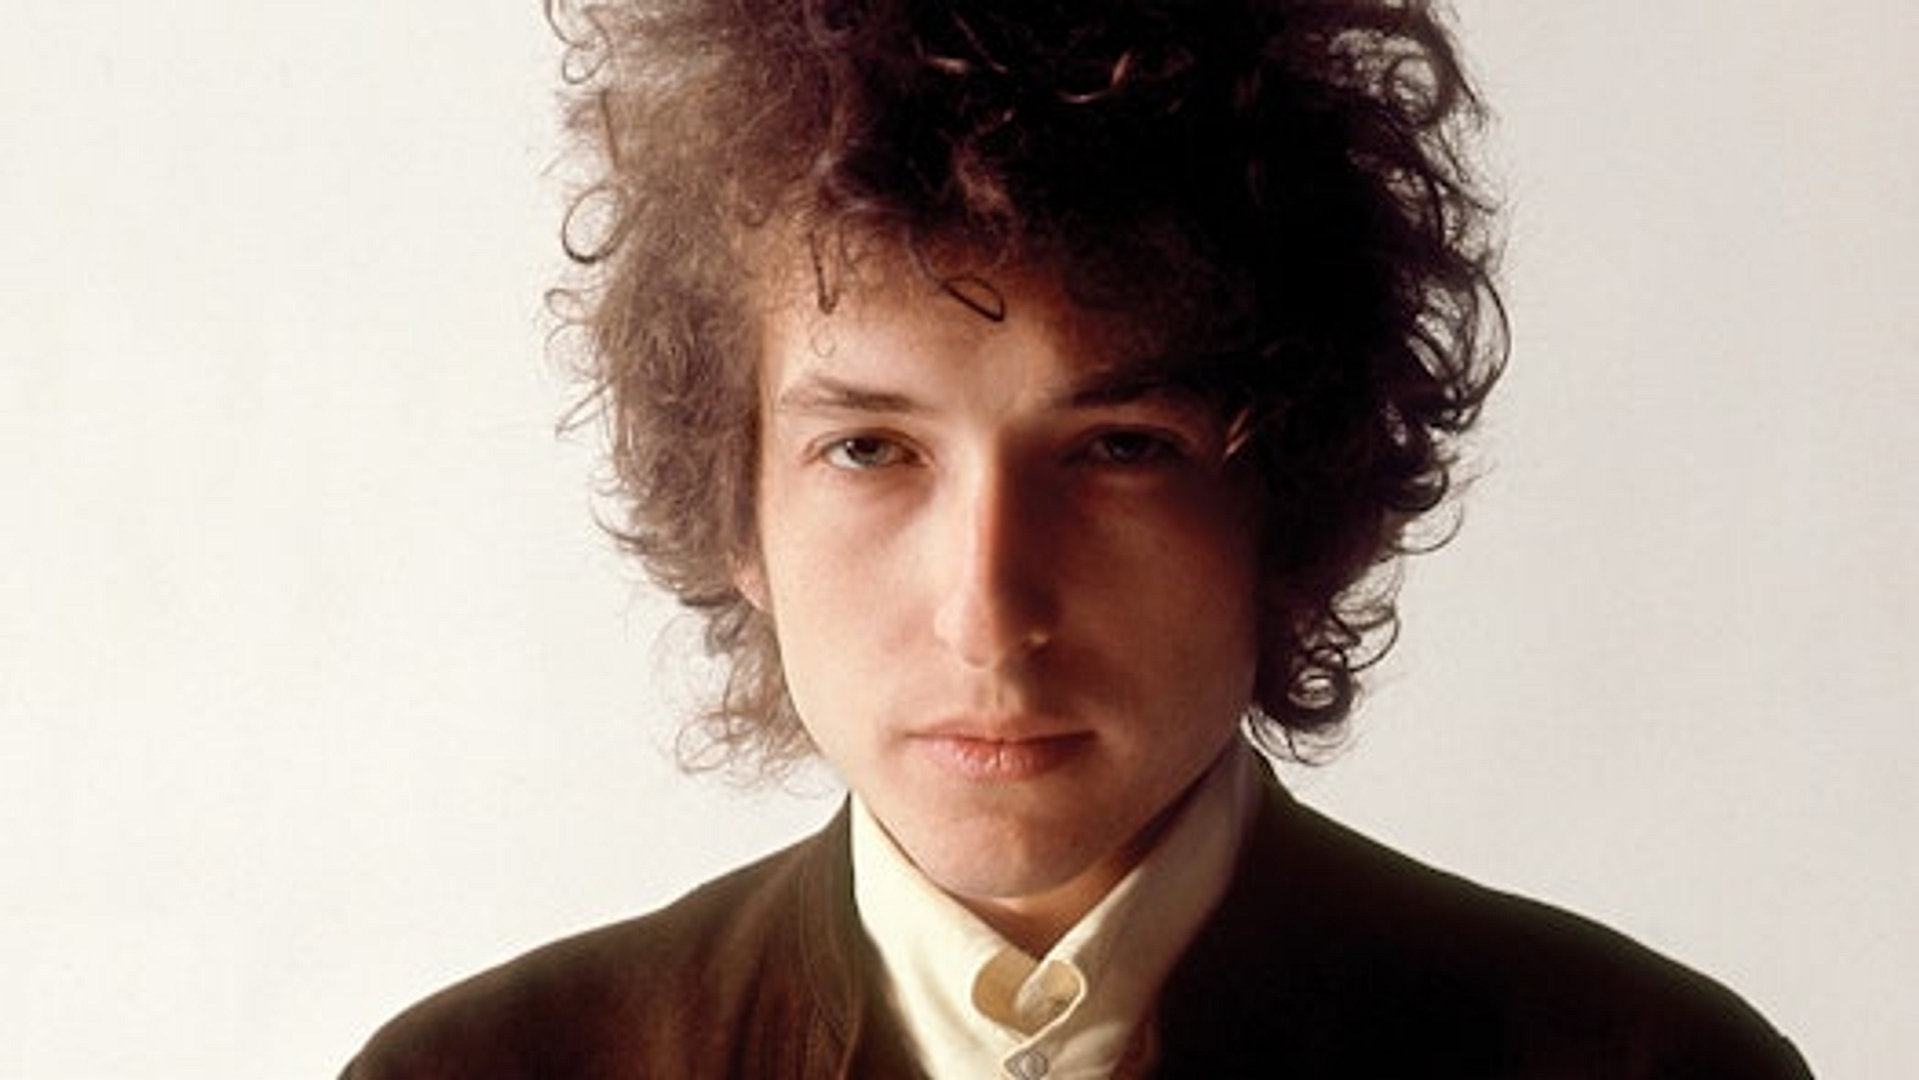 The Other Side Of The Mirror: Bob Dylan Live at Newport Folk Festival 1963-1965